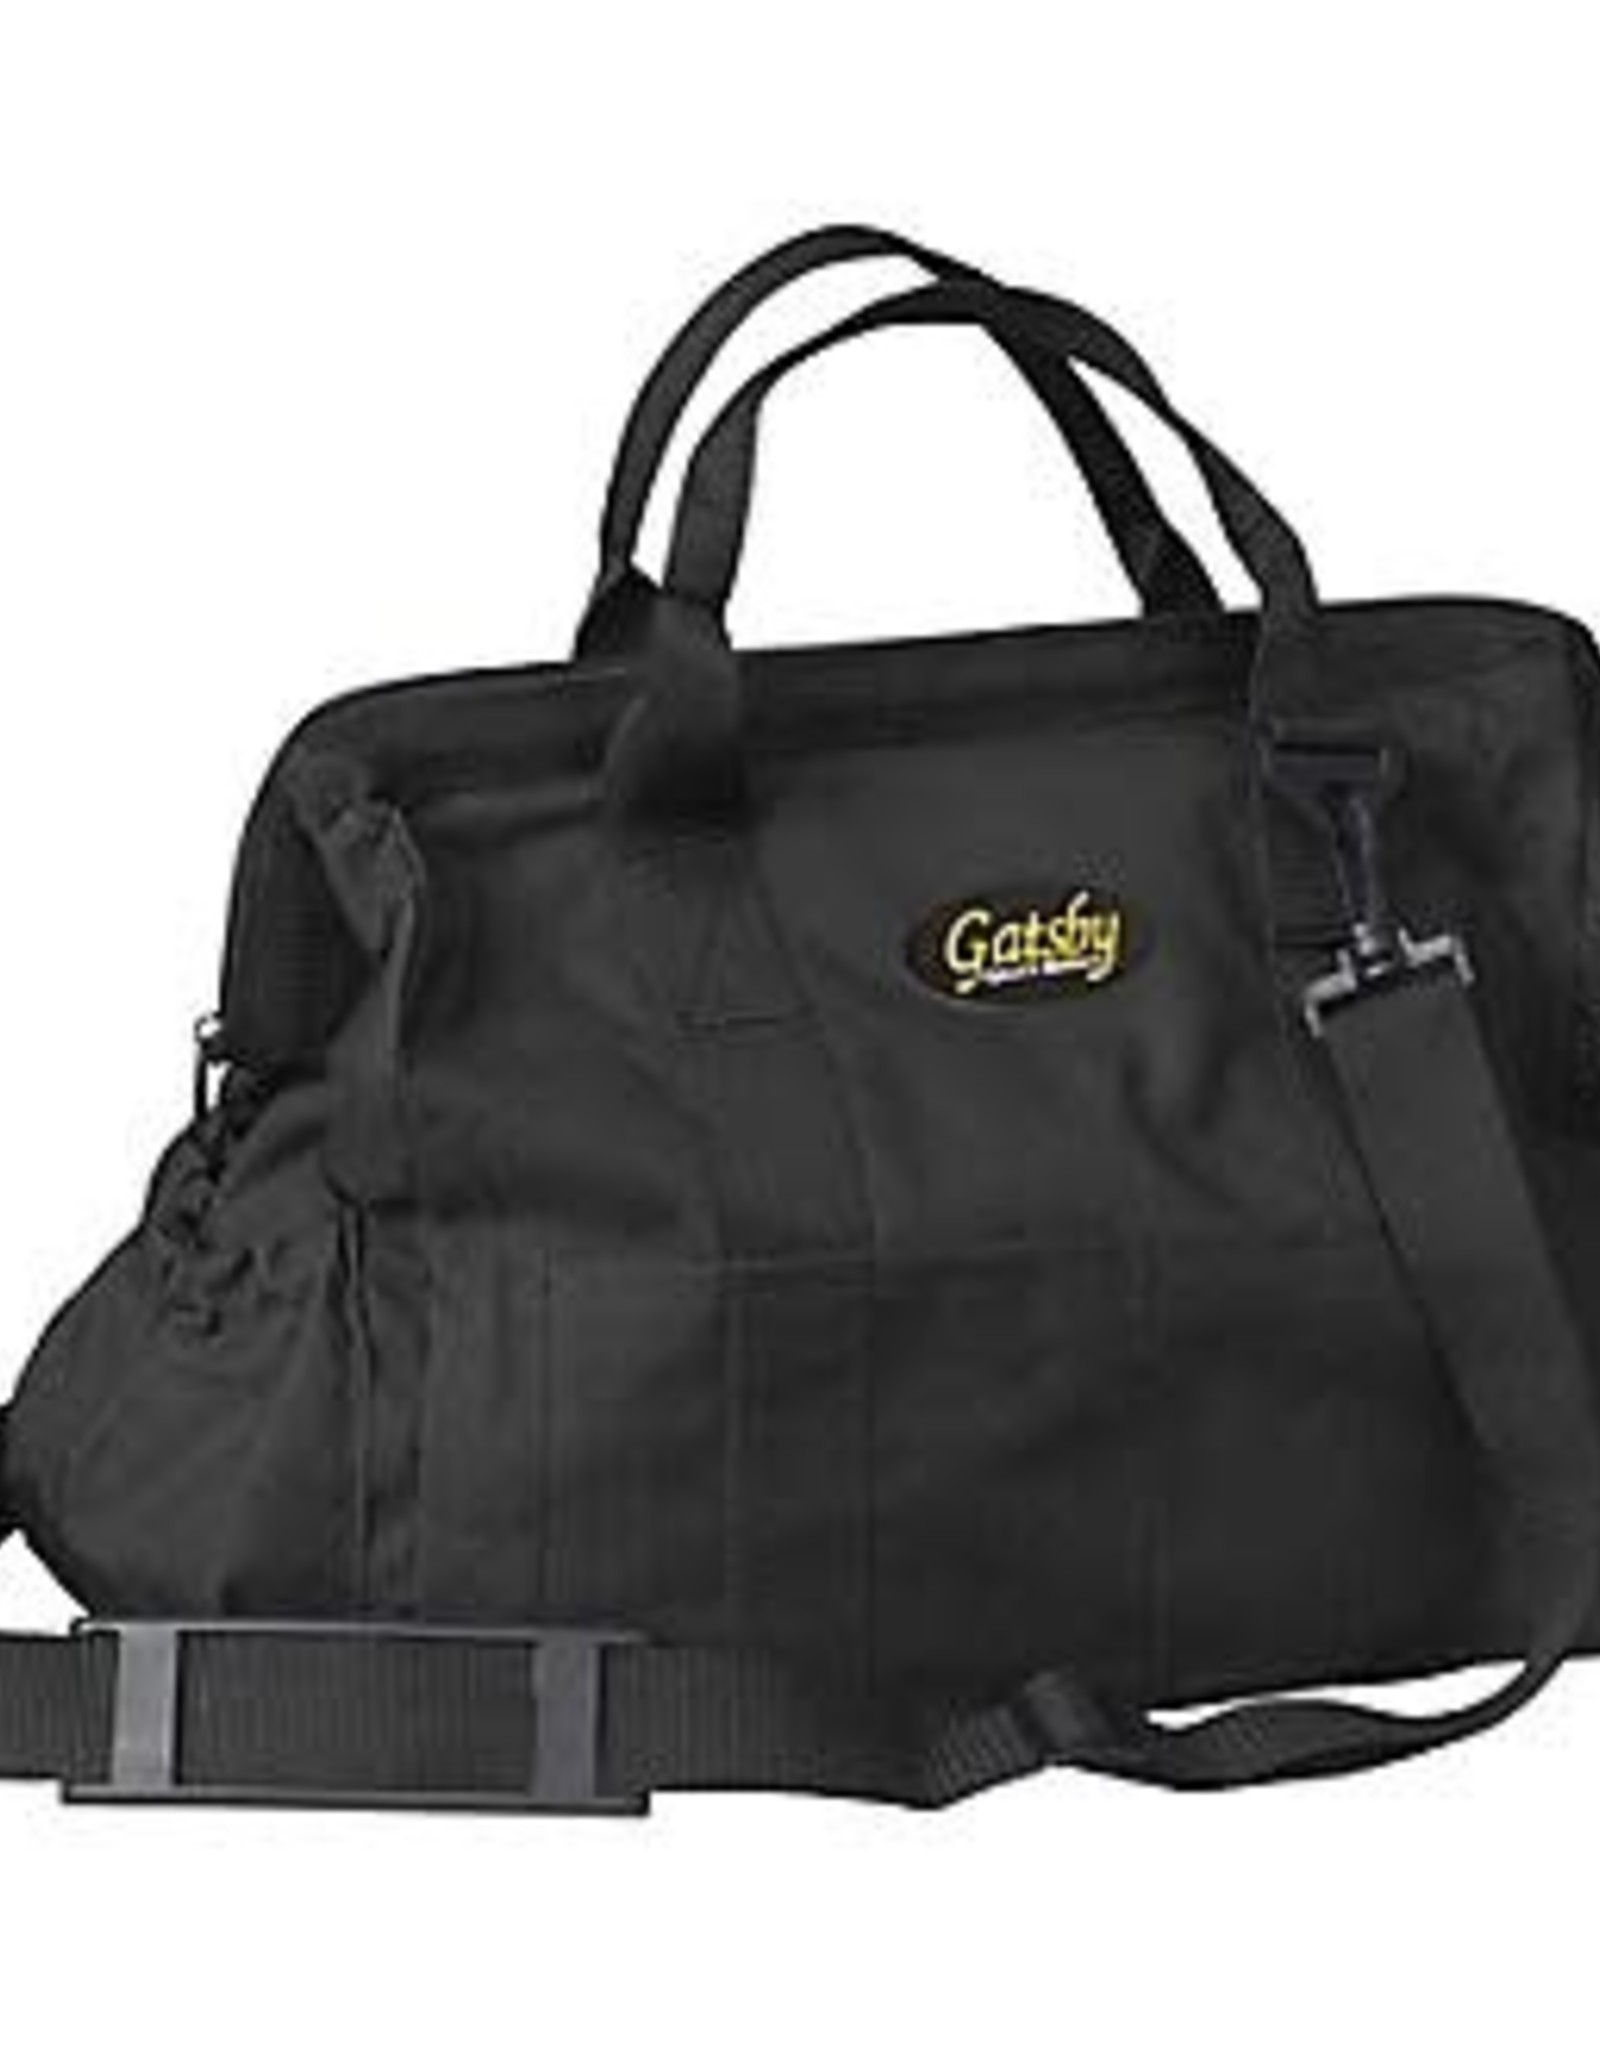 Gatsby Grooming Tote - Toll Booth Saddle Shop